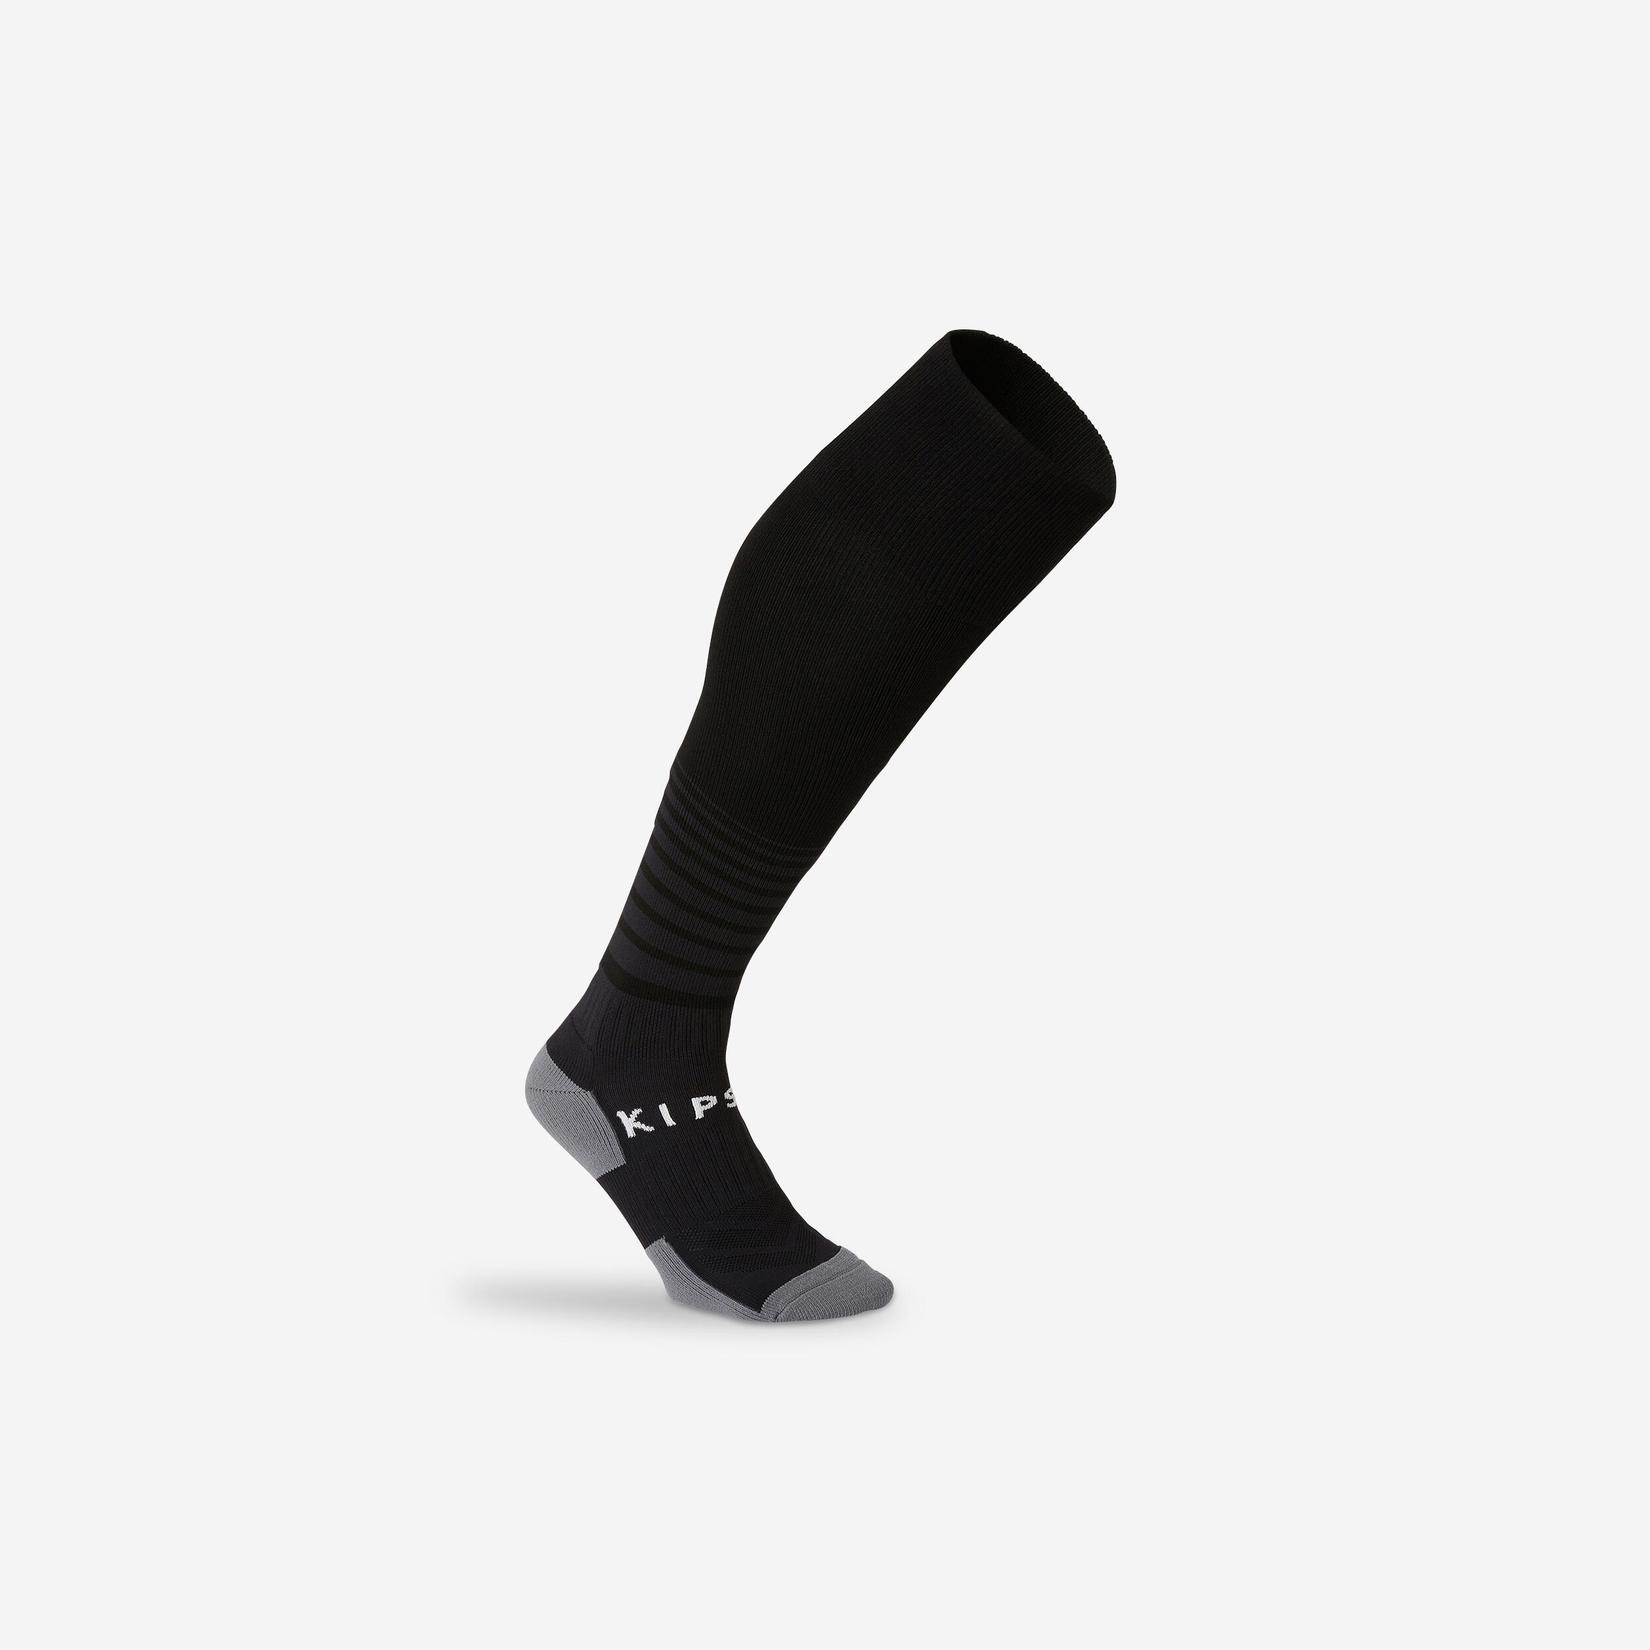 F500 Soccer Socks Black with Stripes - Kids' offers at $10 in Decathlon